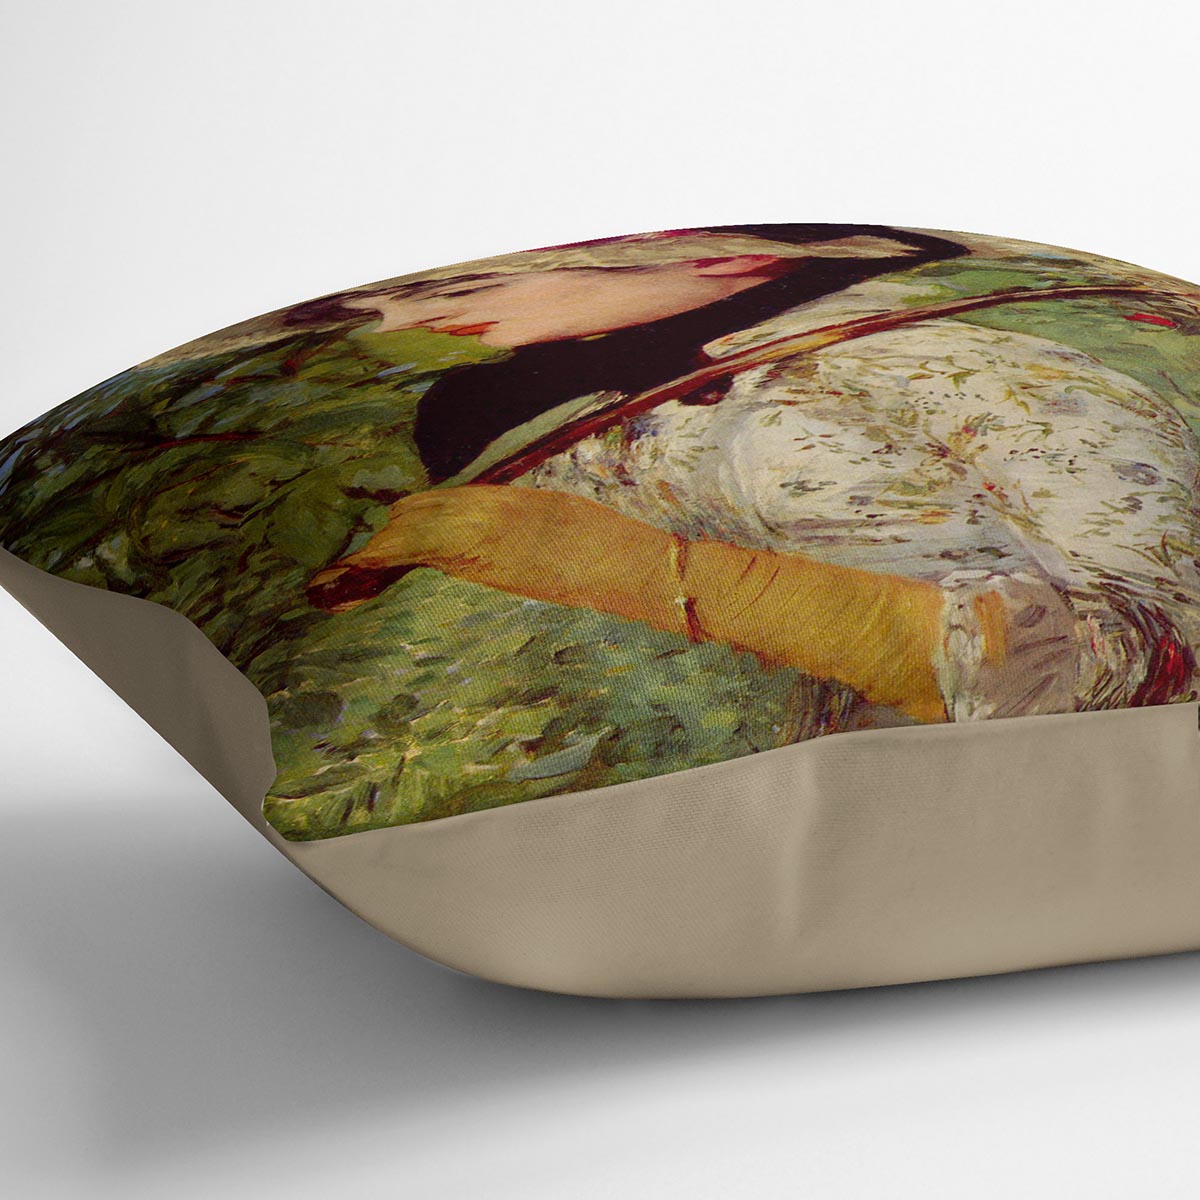 Jeanne by Manet Cushion